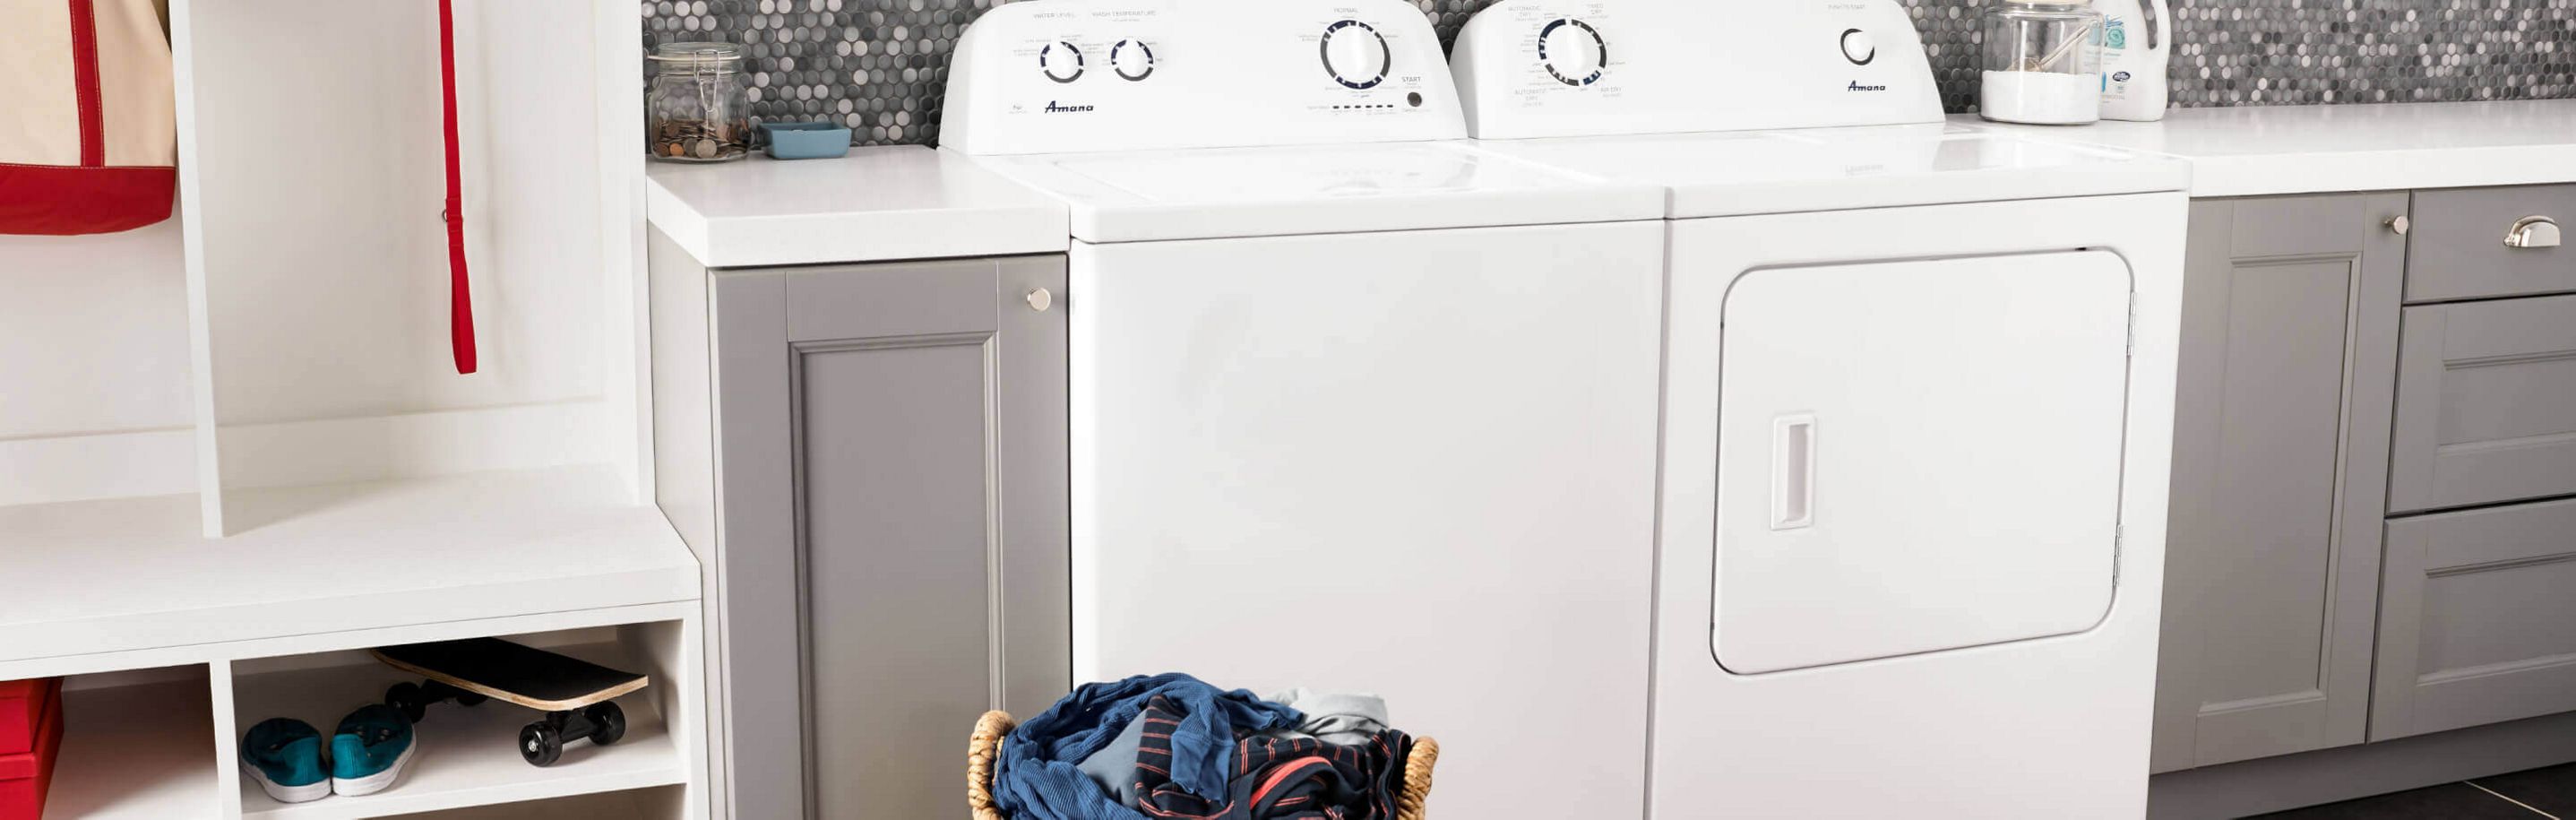 Amana® washer and dryer pair